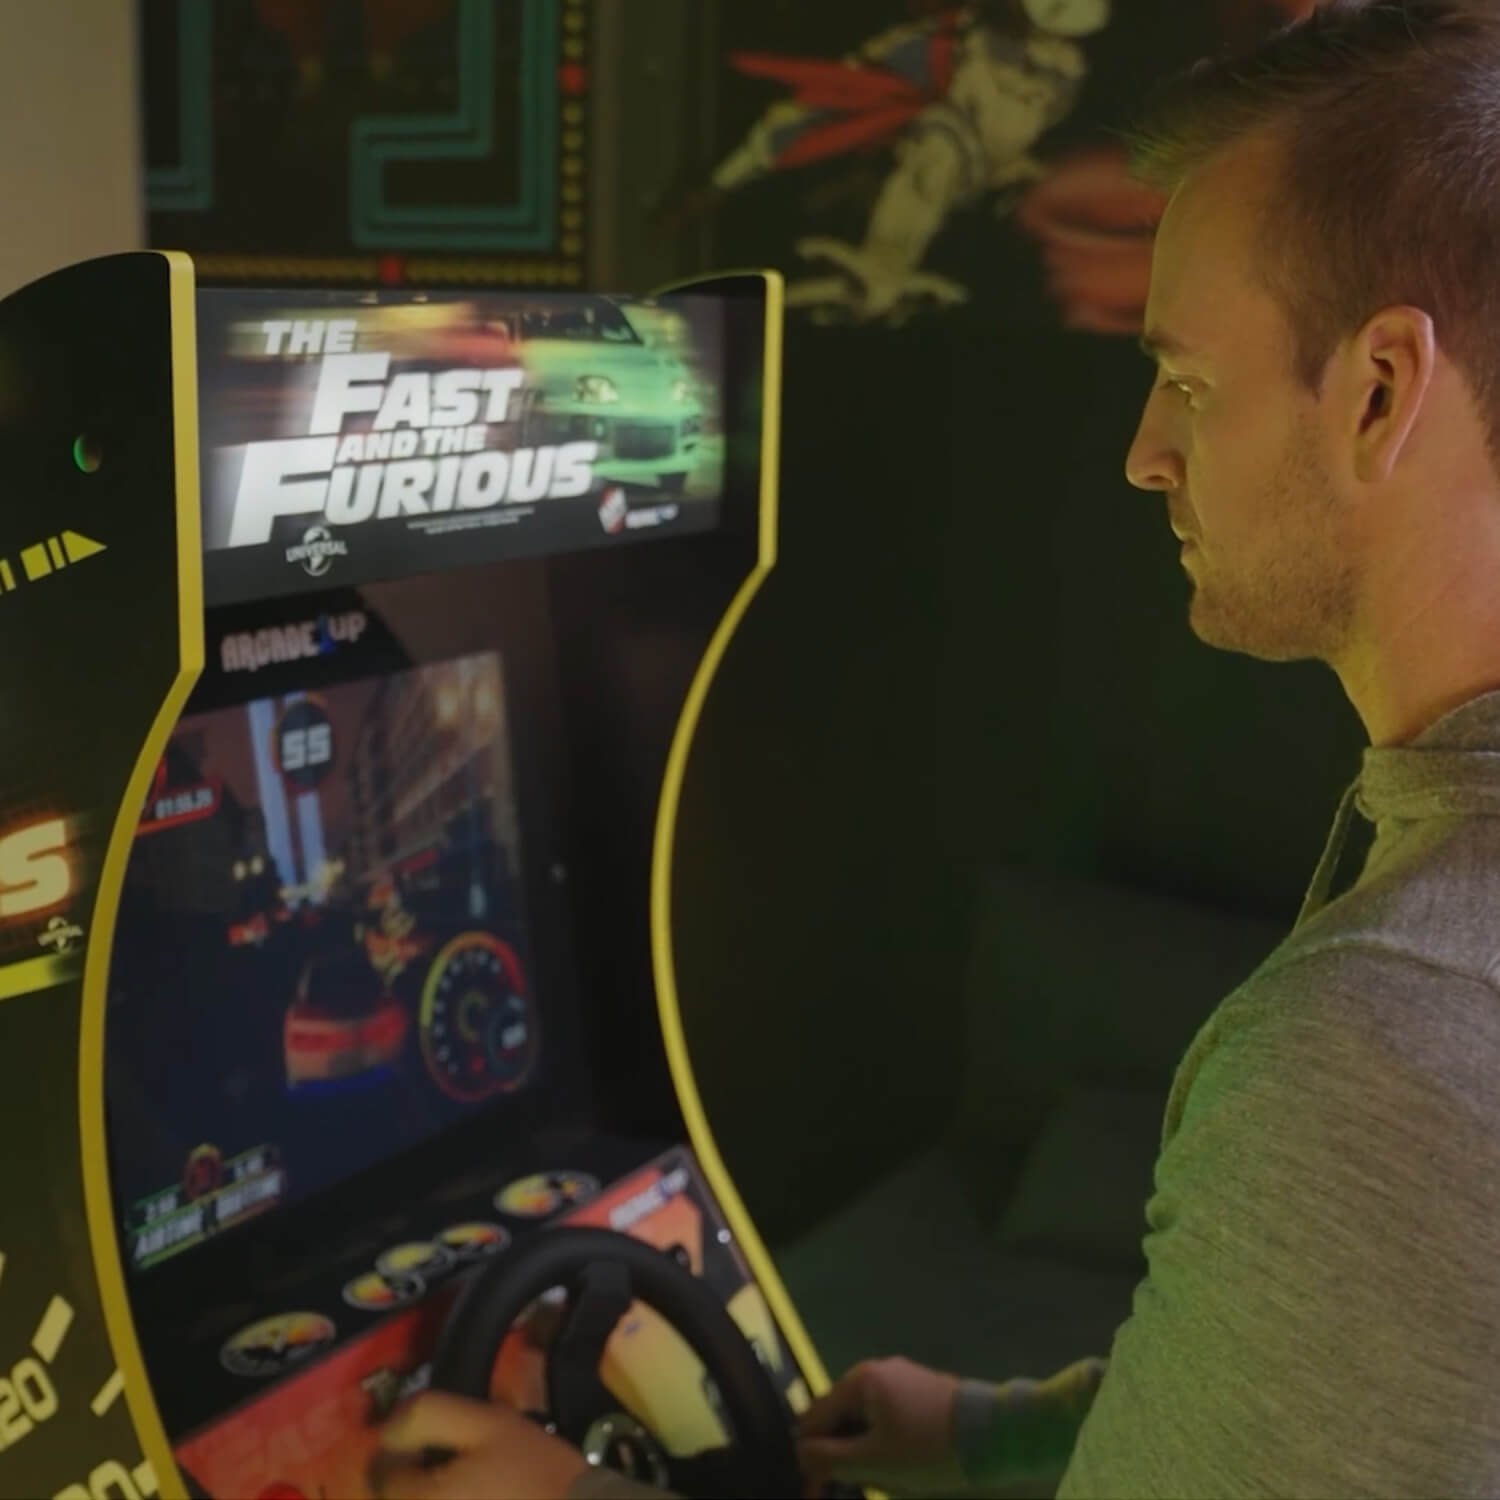 The Fast & The Furious Deluxe Arcade Machine